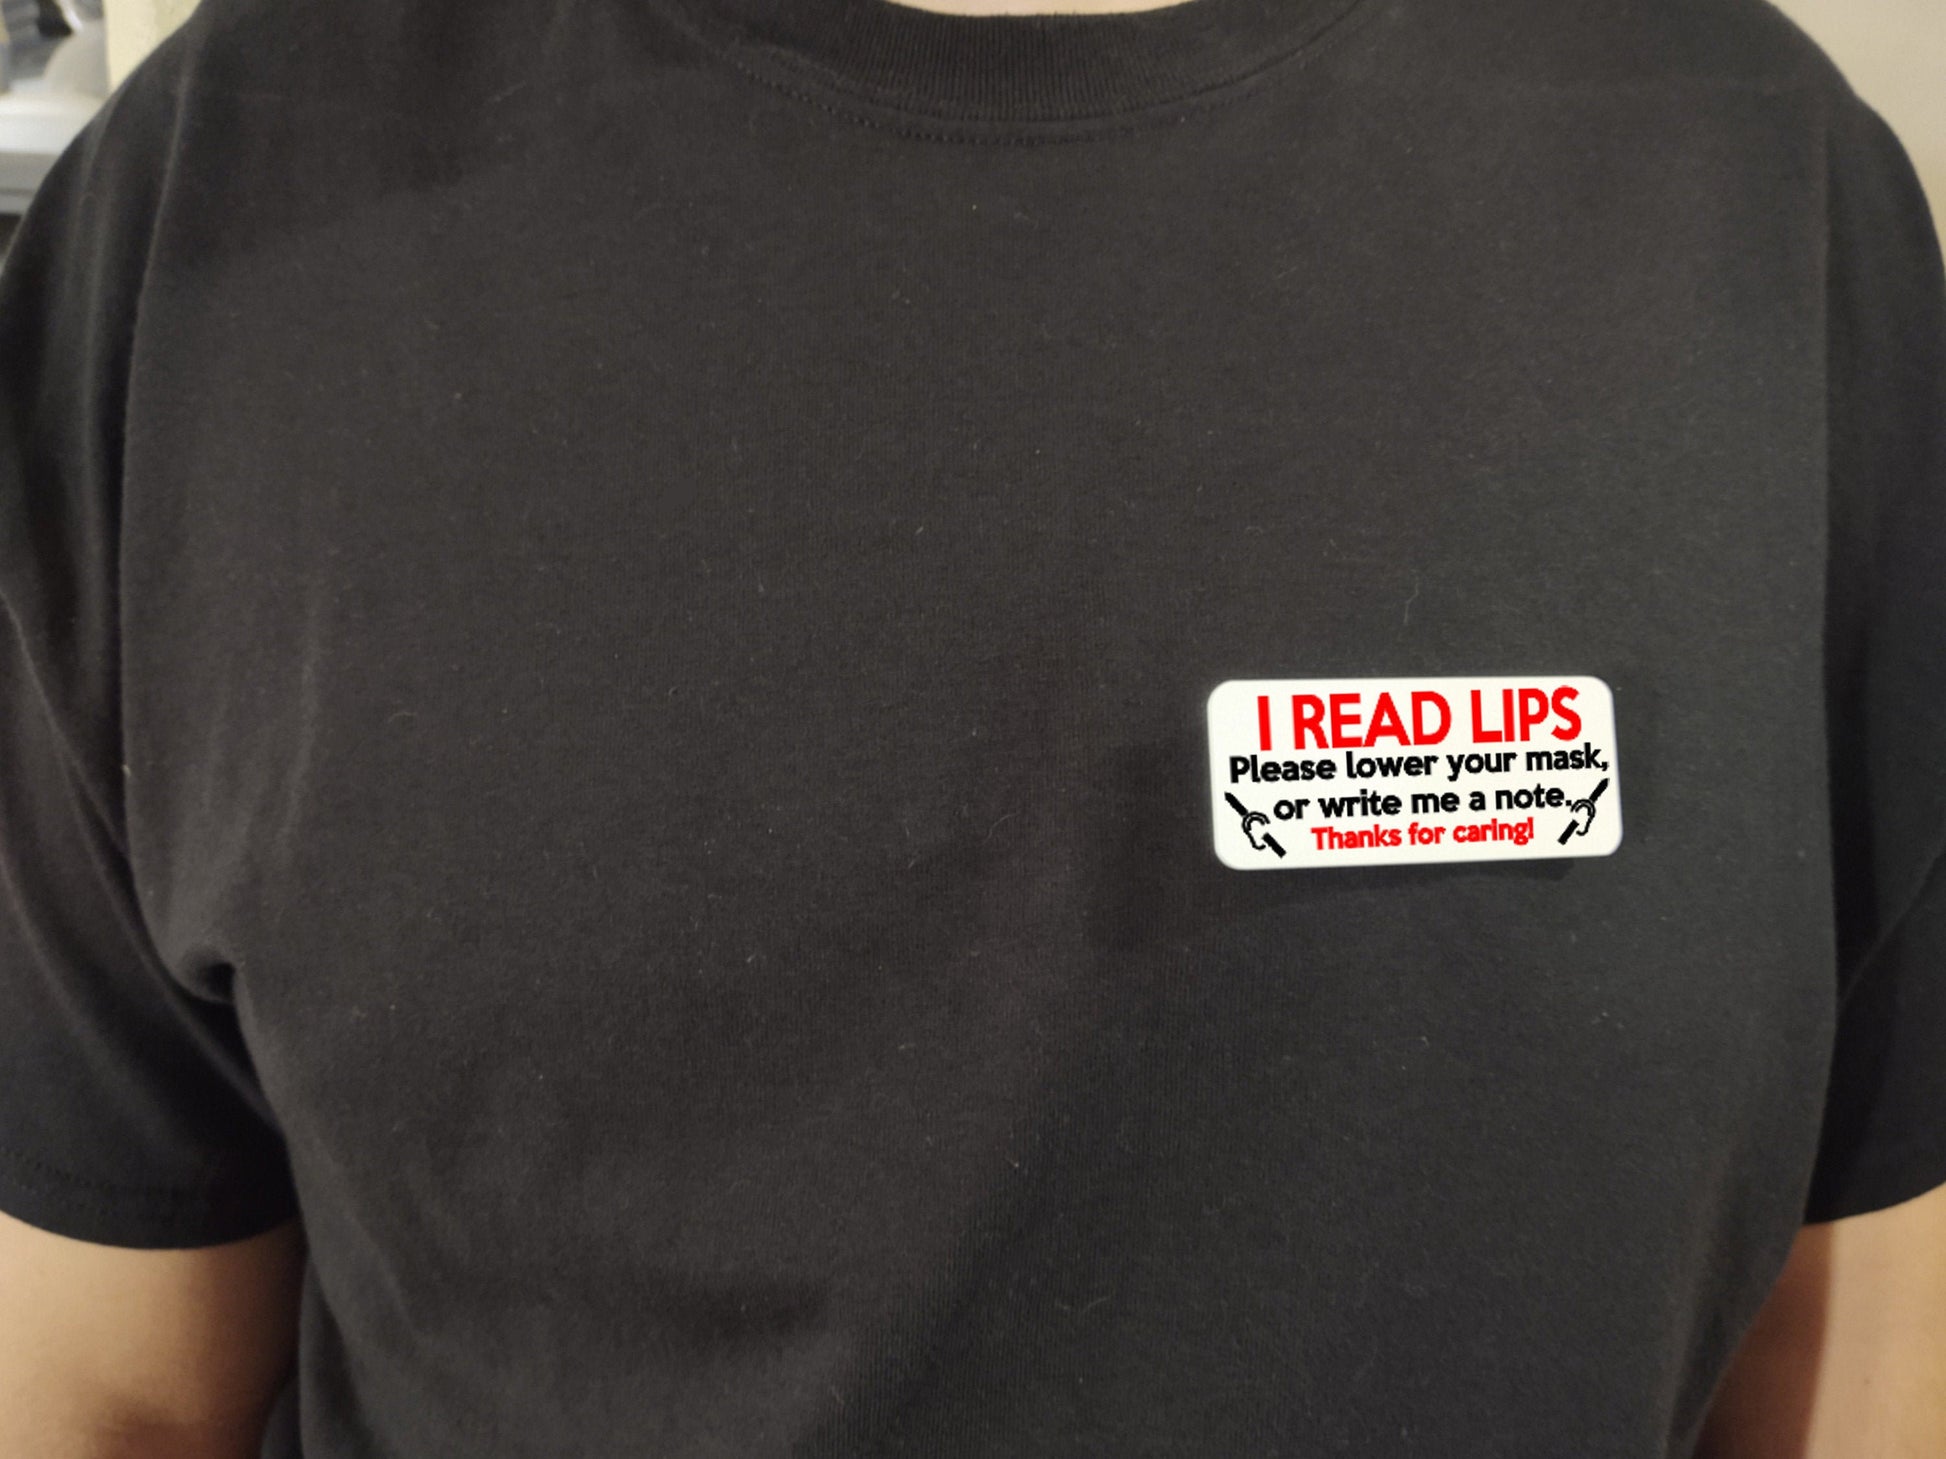 I Read Lips Magnetic Name Tag - Deaf and Hard of Hearing Awareness while everyone is wearing masks